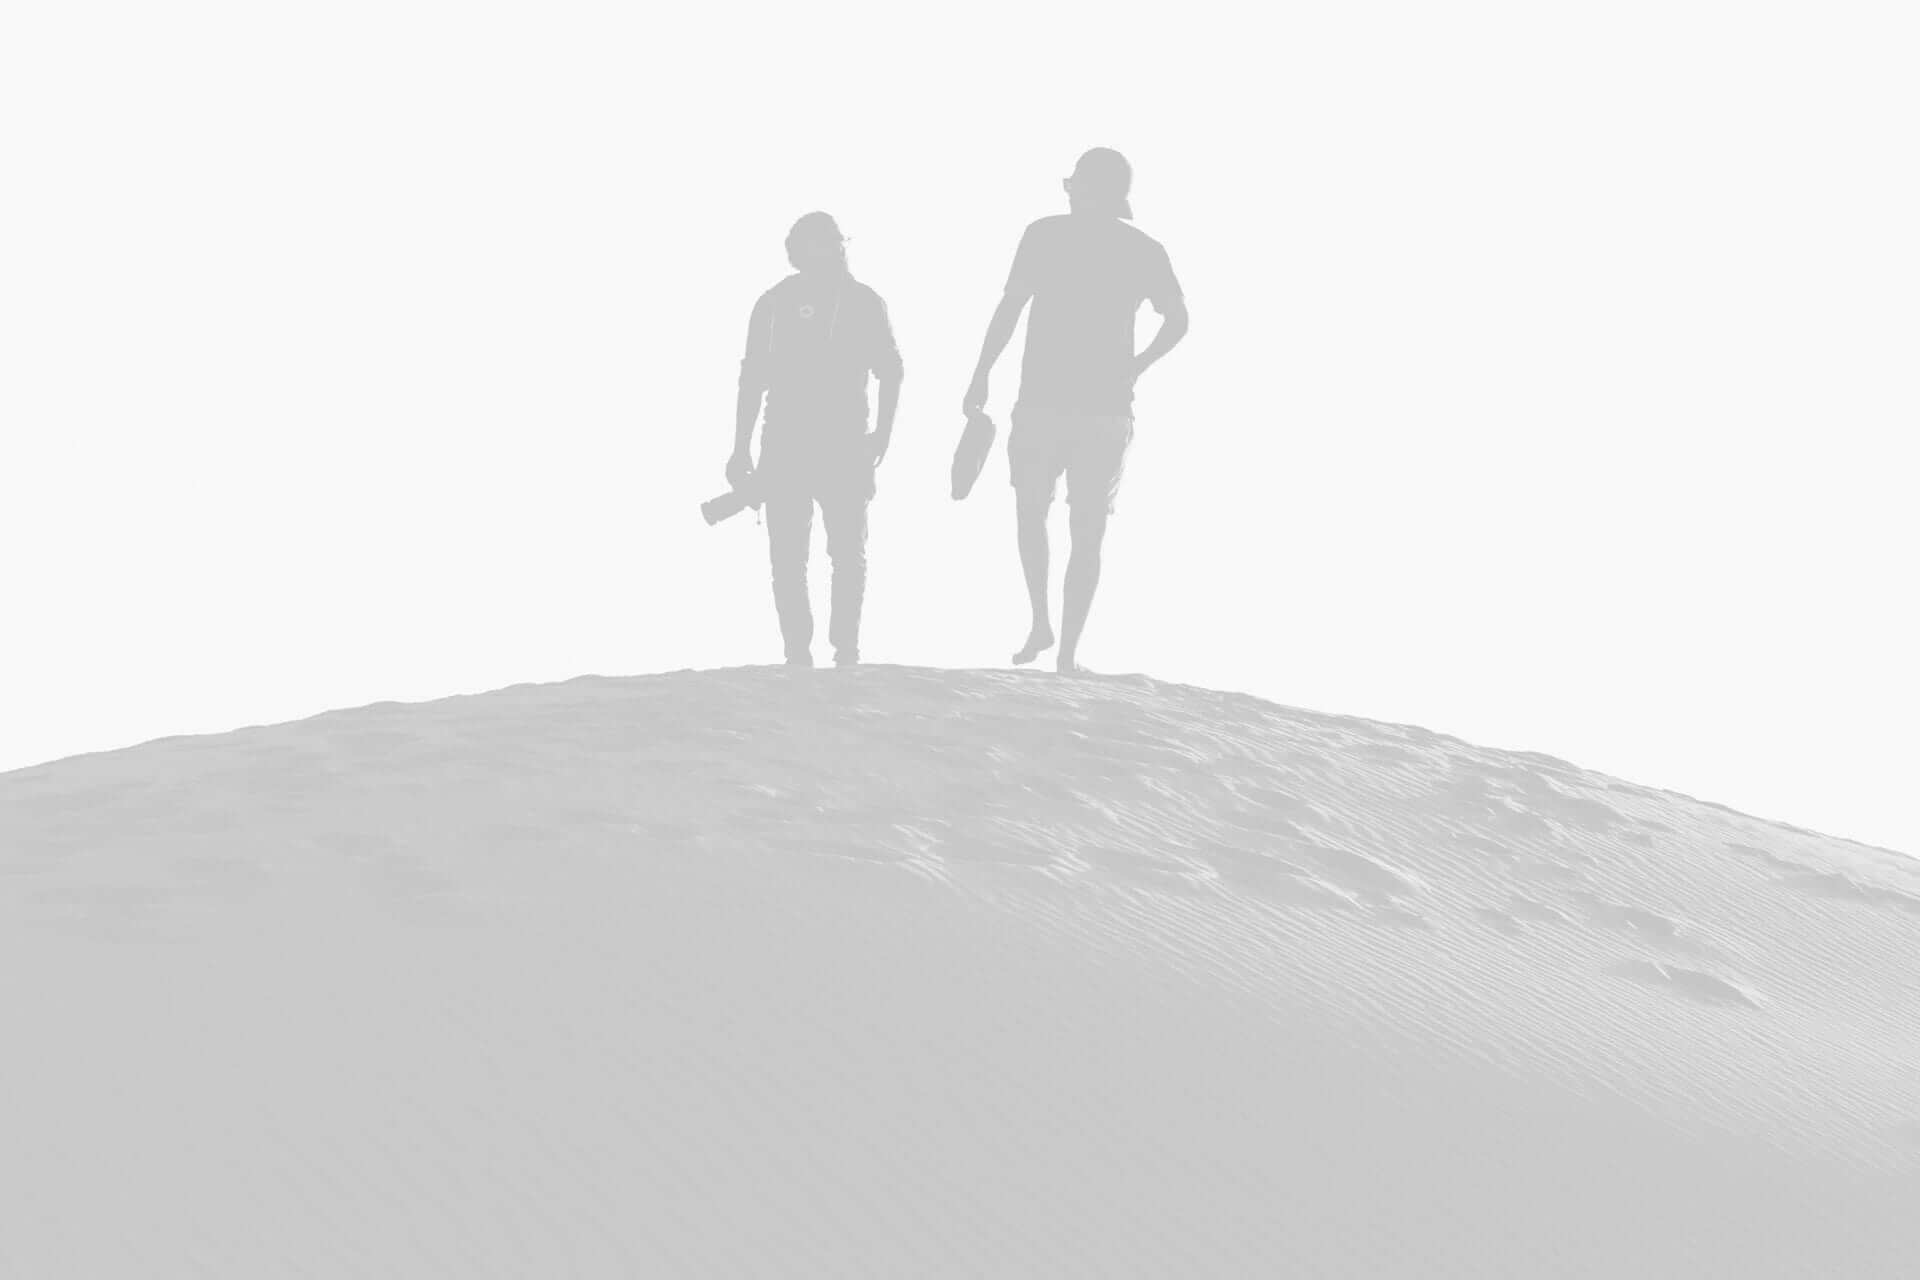 Two people standing on a sand dune, one holding a book, both silhouetted against a bright, overexposed sky.